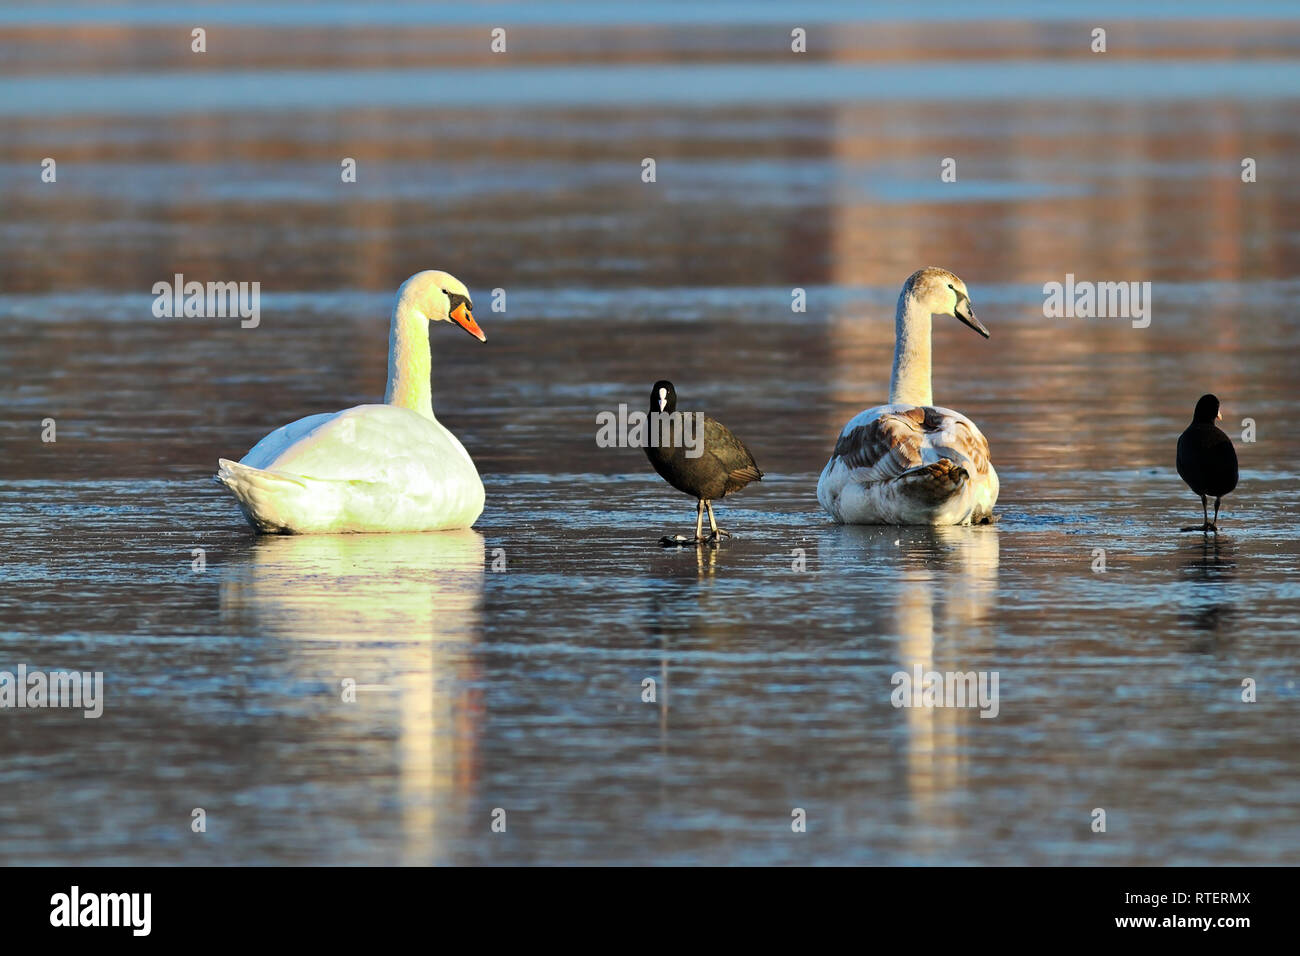 common coot on icy lake,standing with mute swans ( Fulica atra, Cygnus olor ) Stock Photo